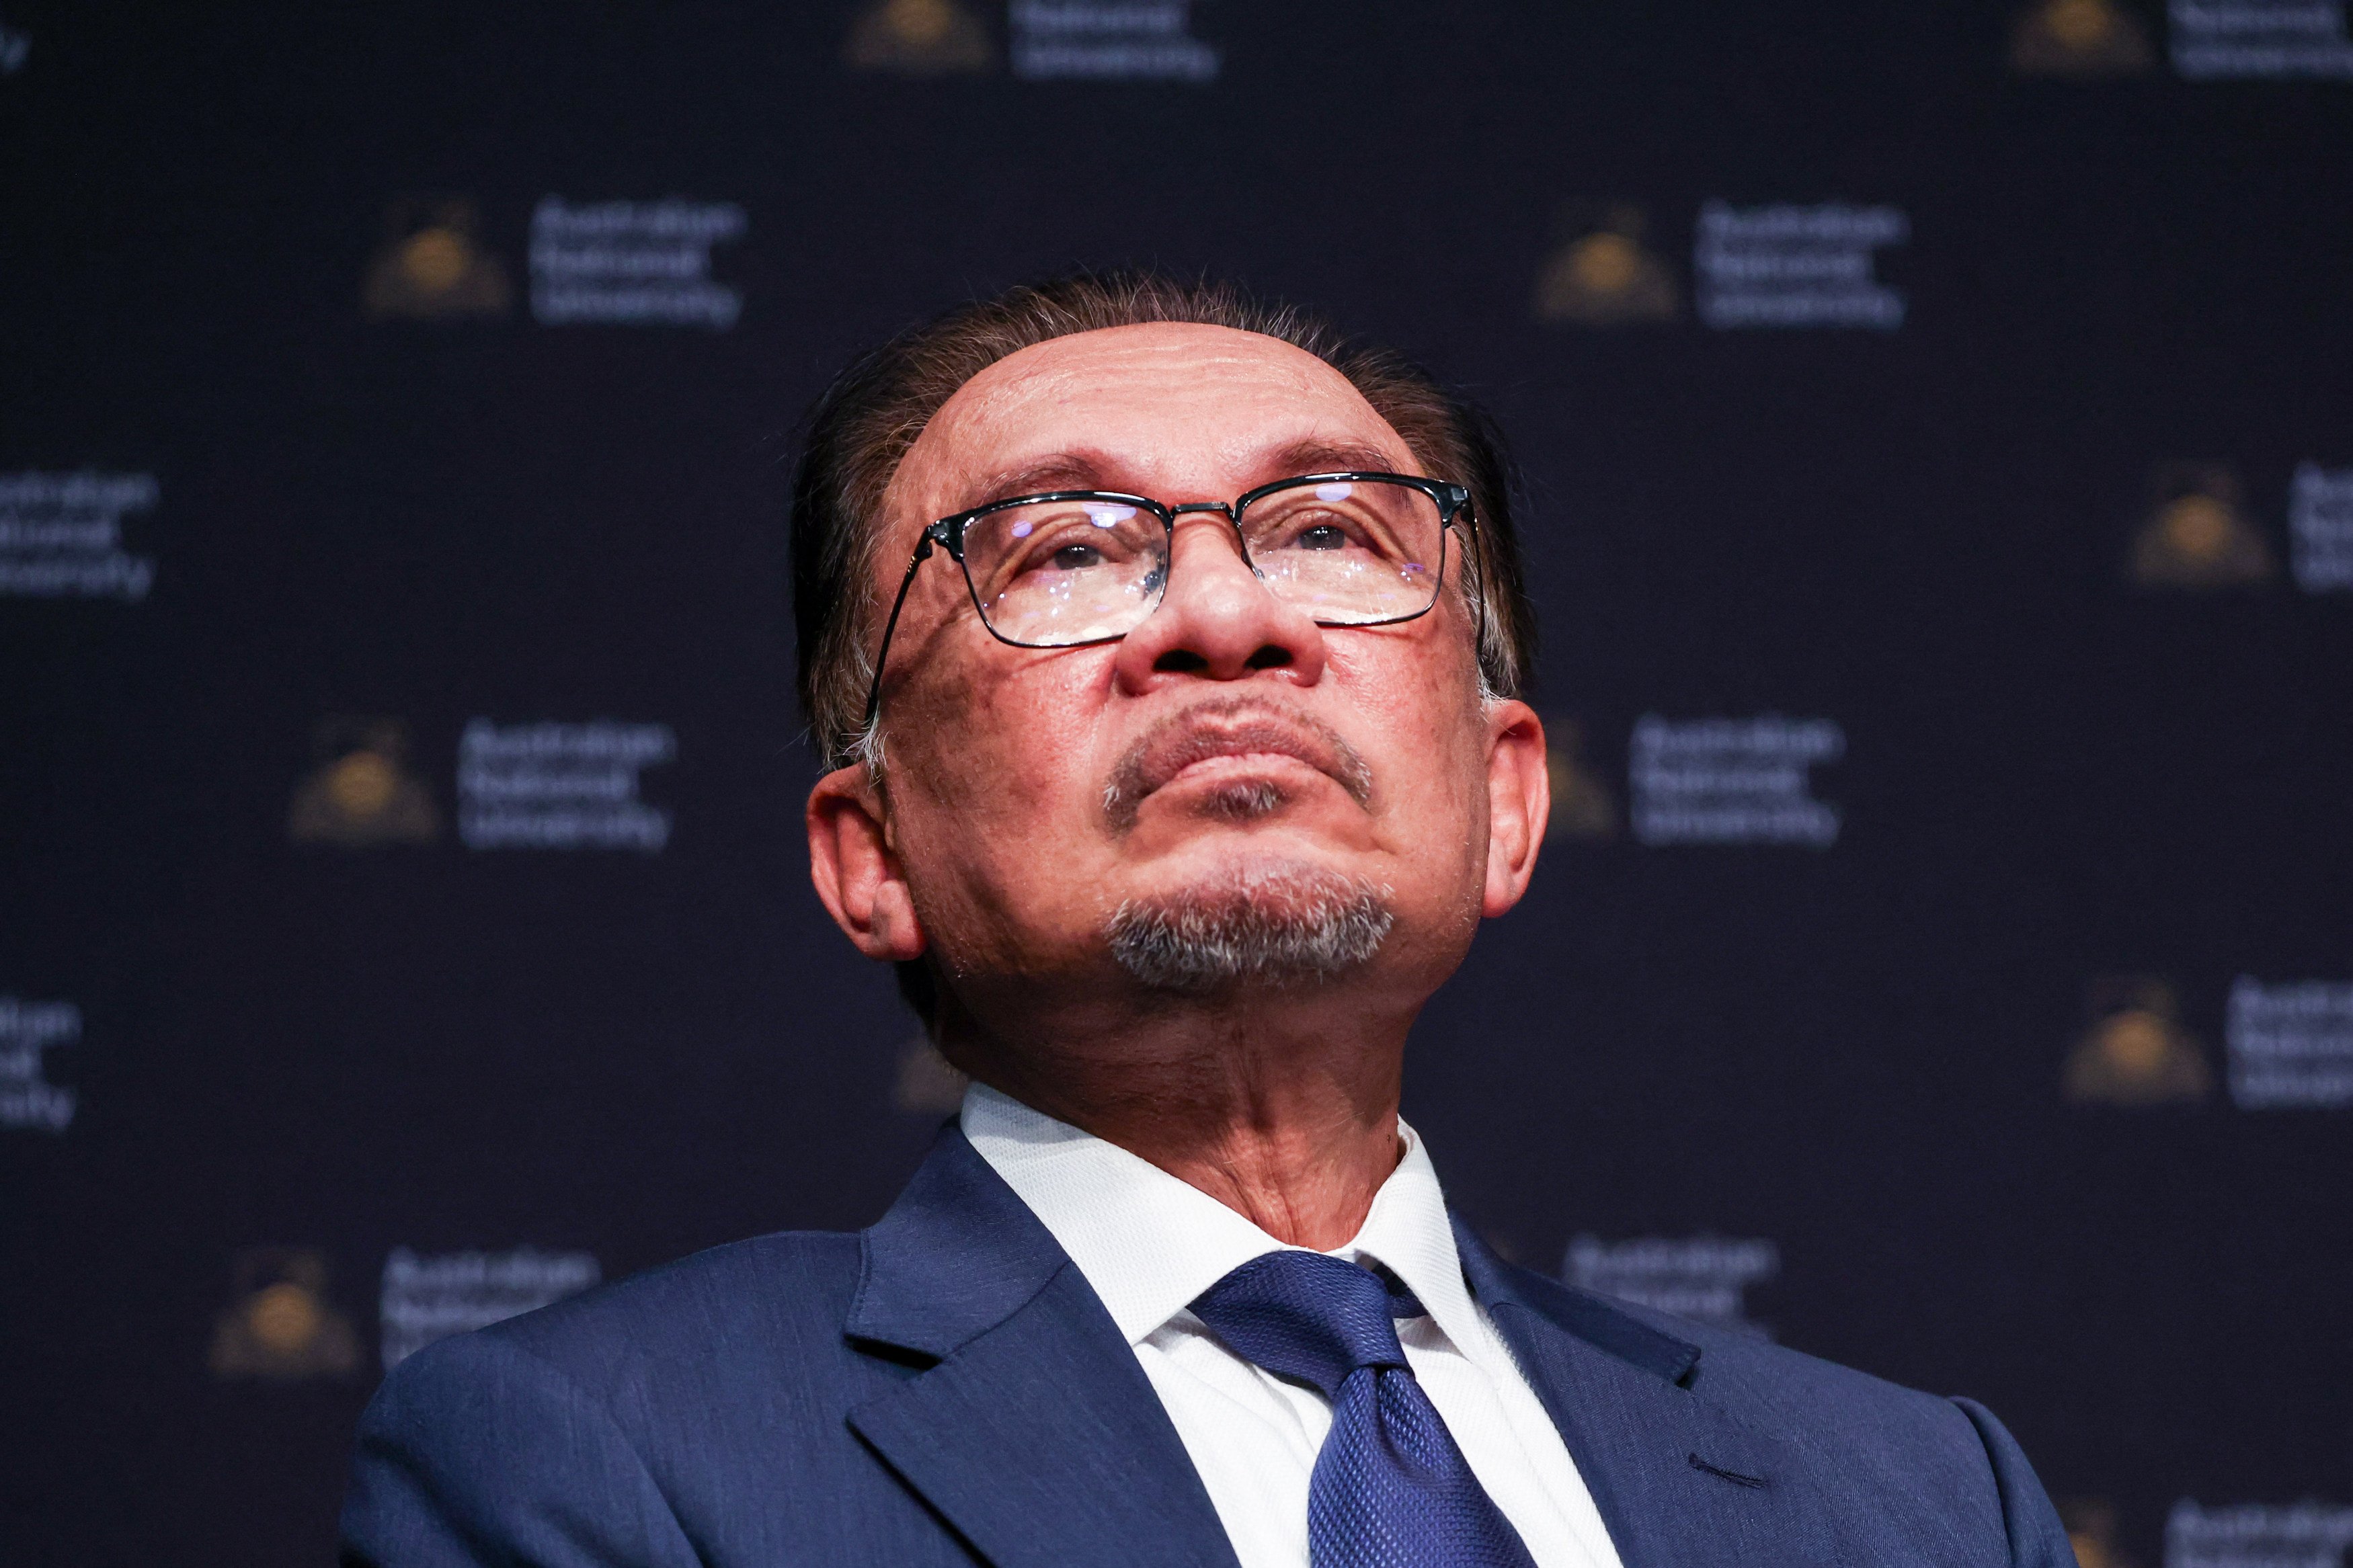 Malaysian Prime Minister Anwar Ibrahim. He has bristled at accusations that his People’s Justice Party abandoned its reform promises in the wake of the apparent leniency shown Najib, and others. Photo: AFP